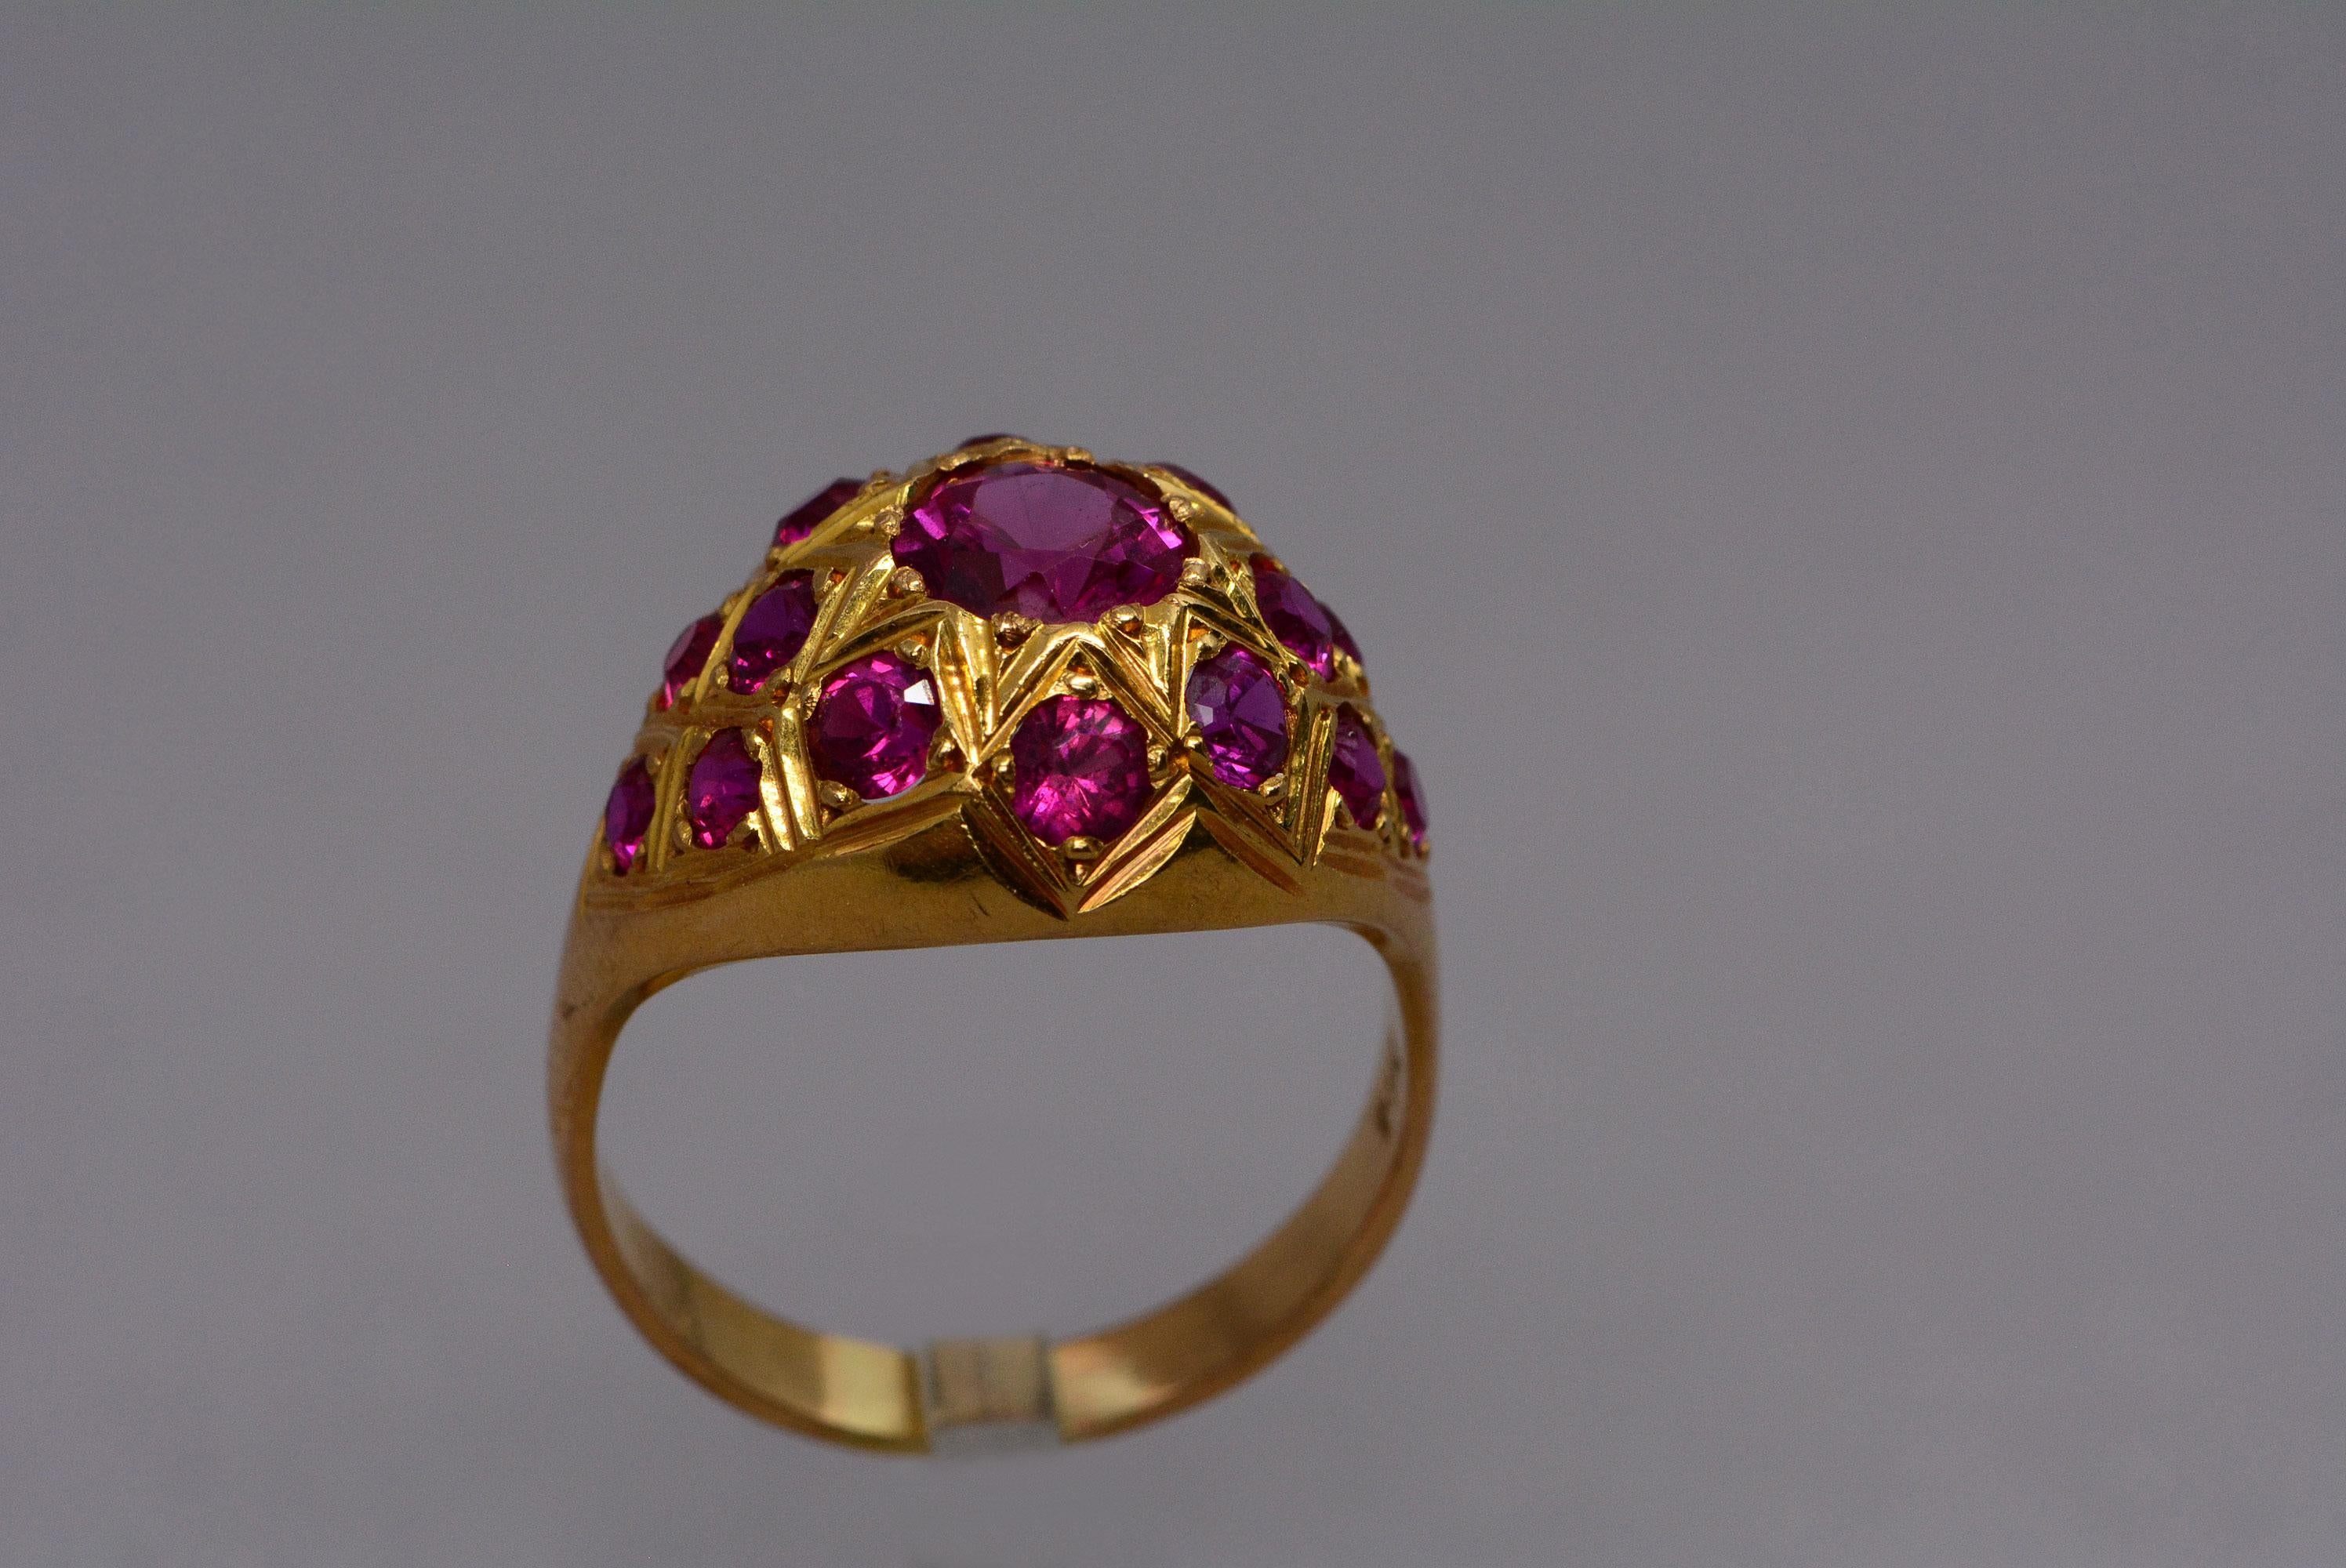 It's not often that you come across a high karat gold ring that's in such great condition for it's age or with its original gems in tact.
People always think of synthetic gemstones as less valued than natural ones, but at the time that this ring was